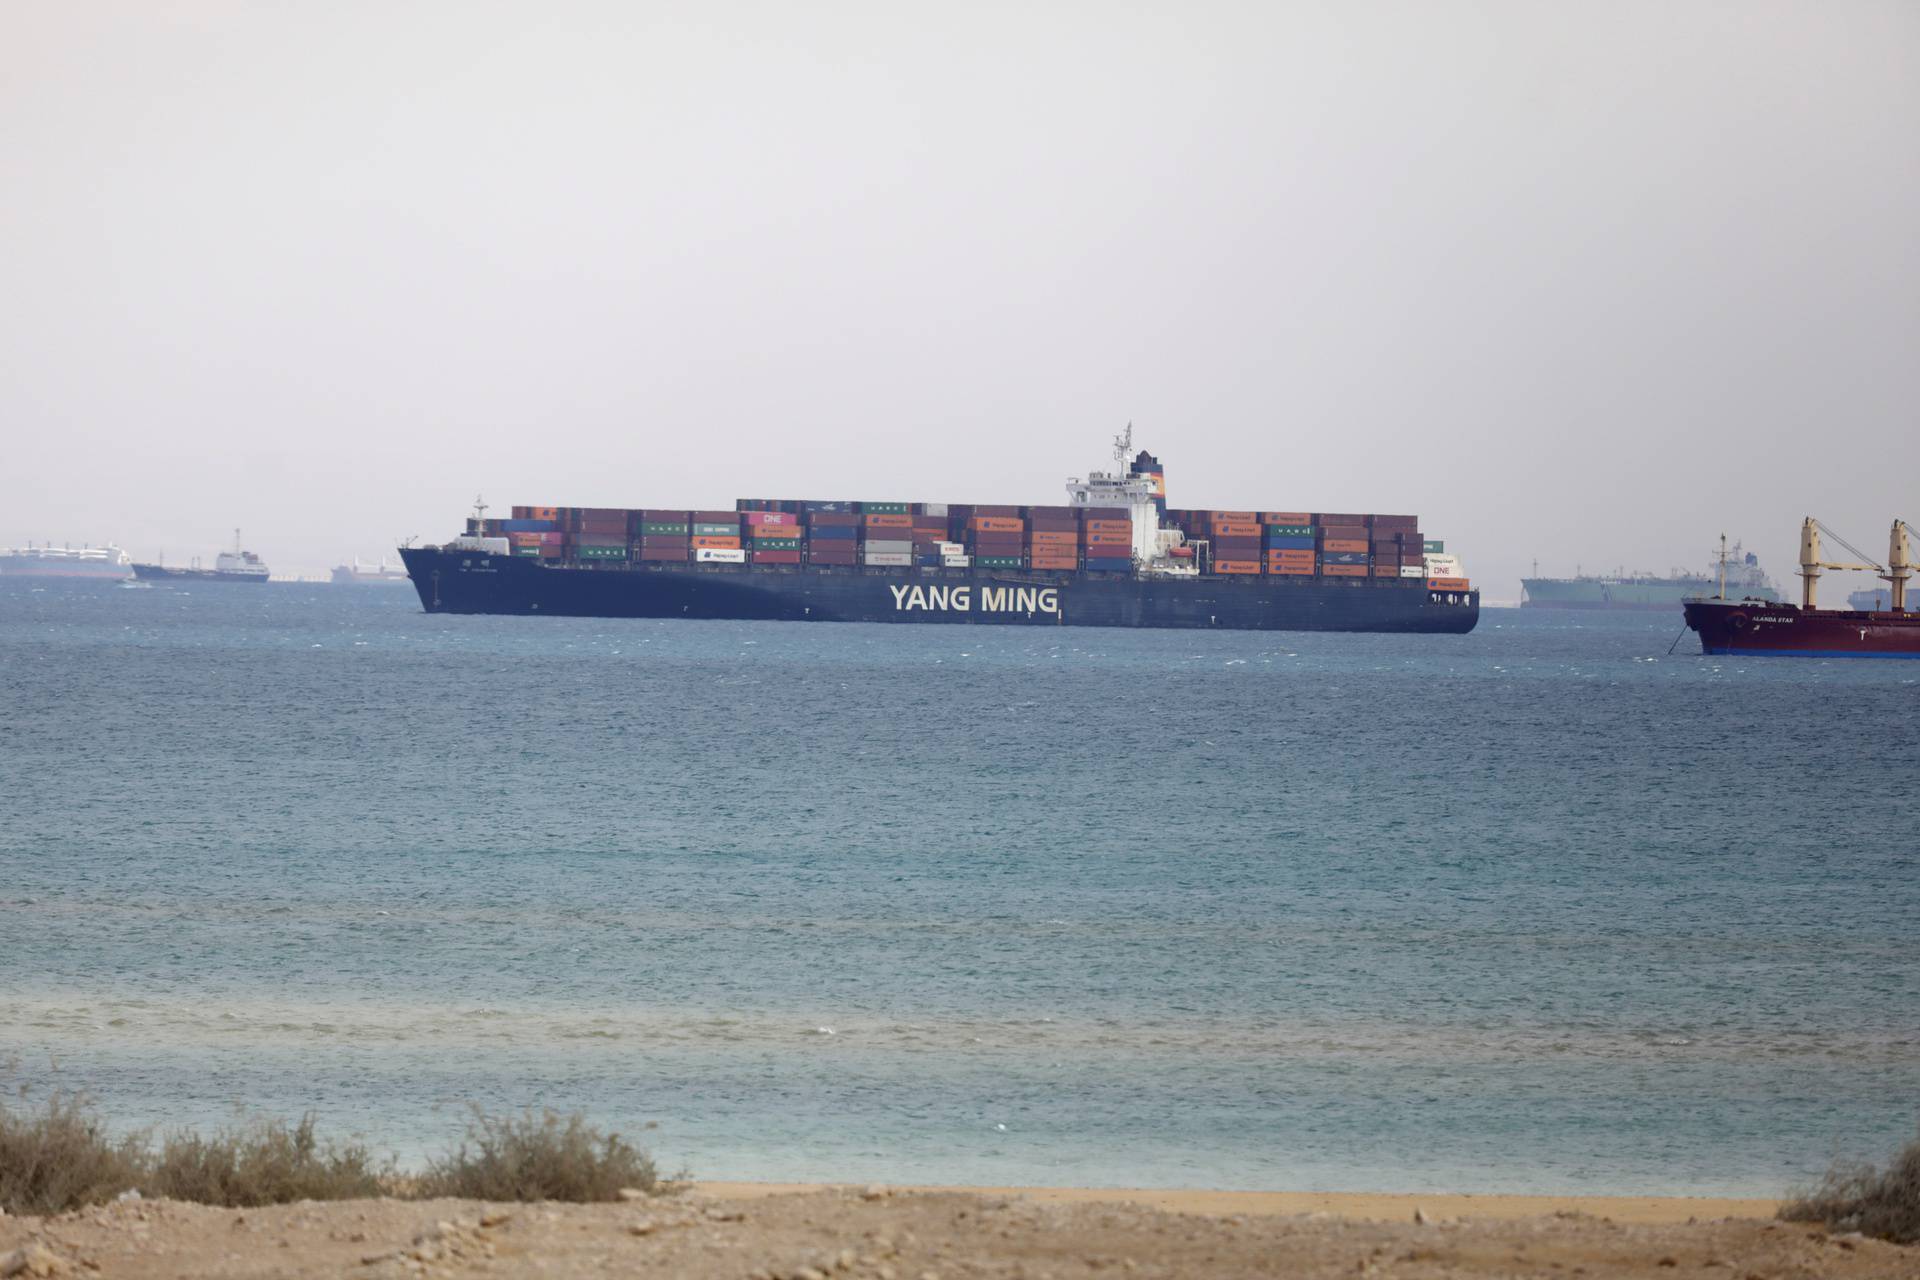 Ships are seen at the entrance of the Suez Canal